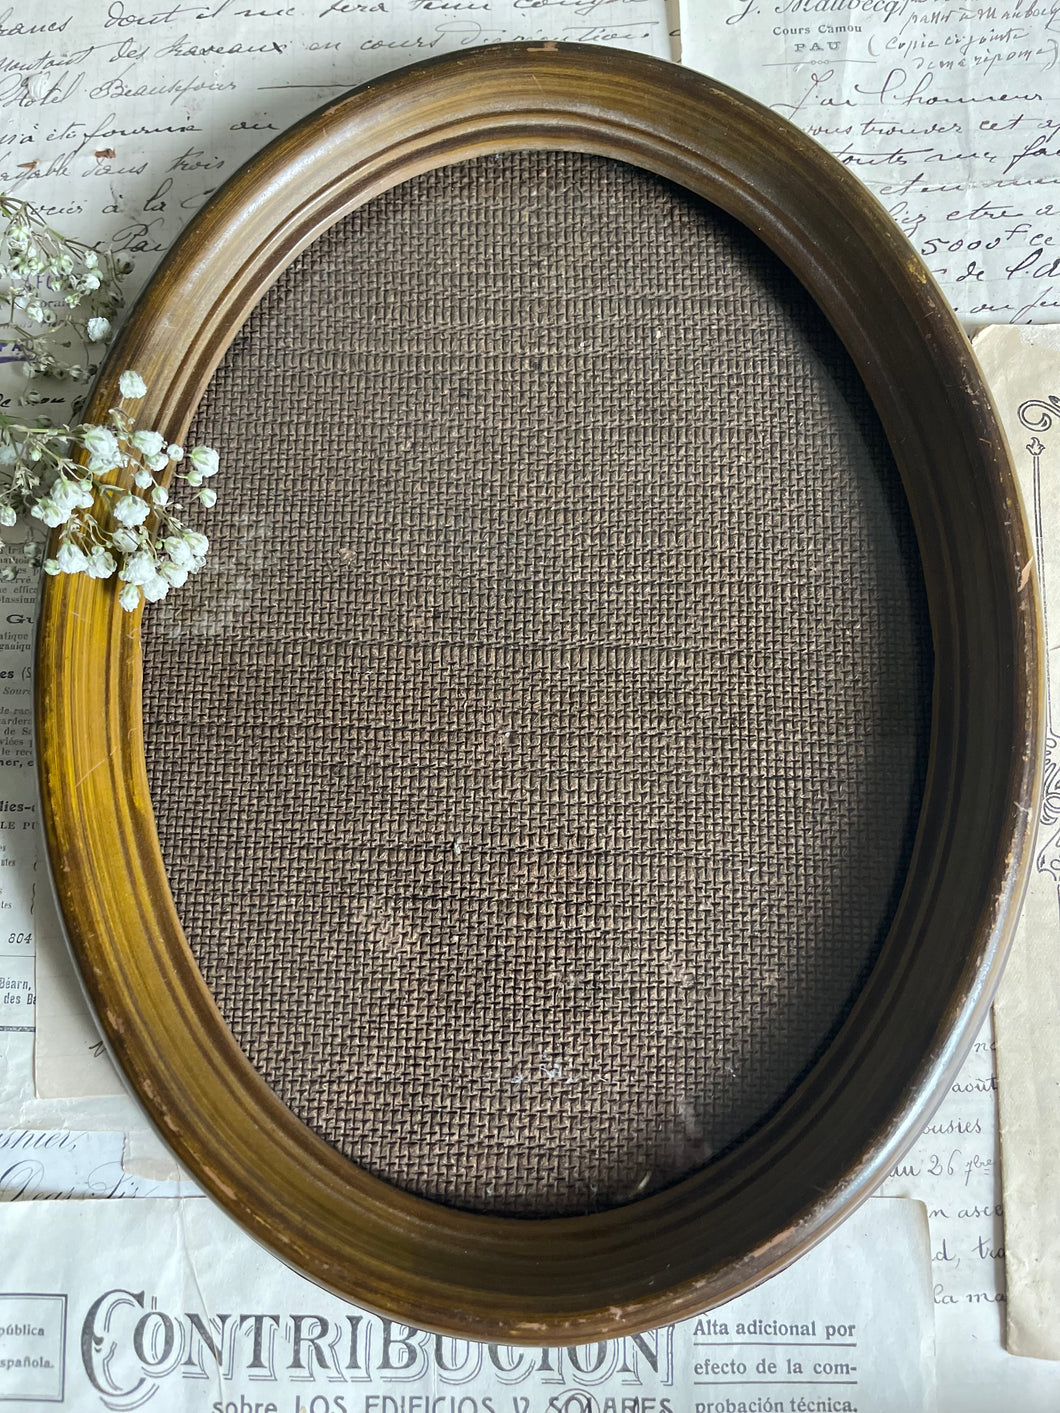 Vintage Oval Portrait Frame With Glass - Circa 1950.